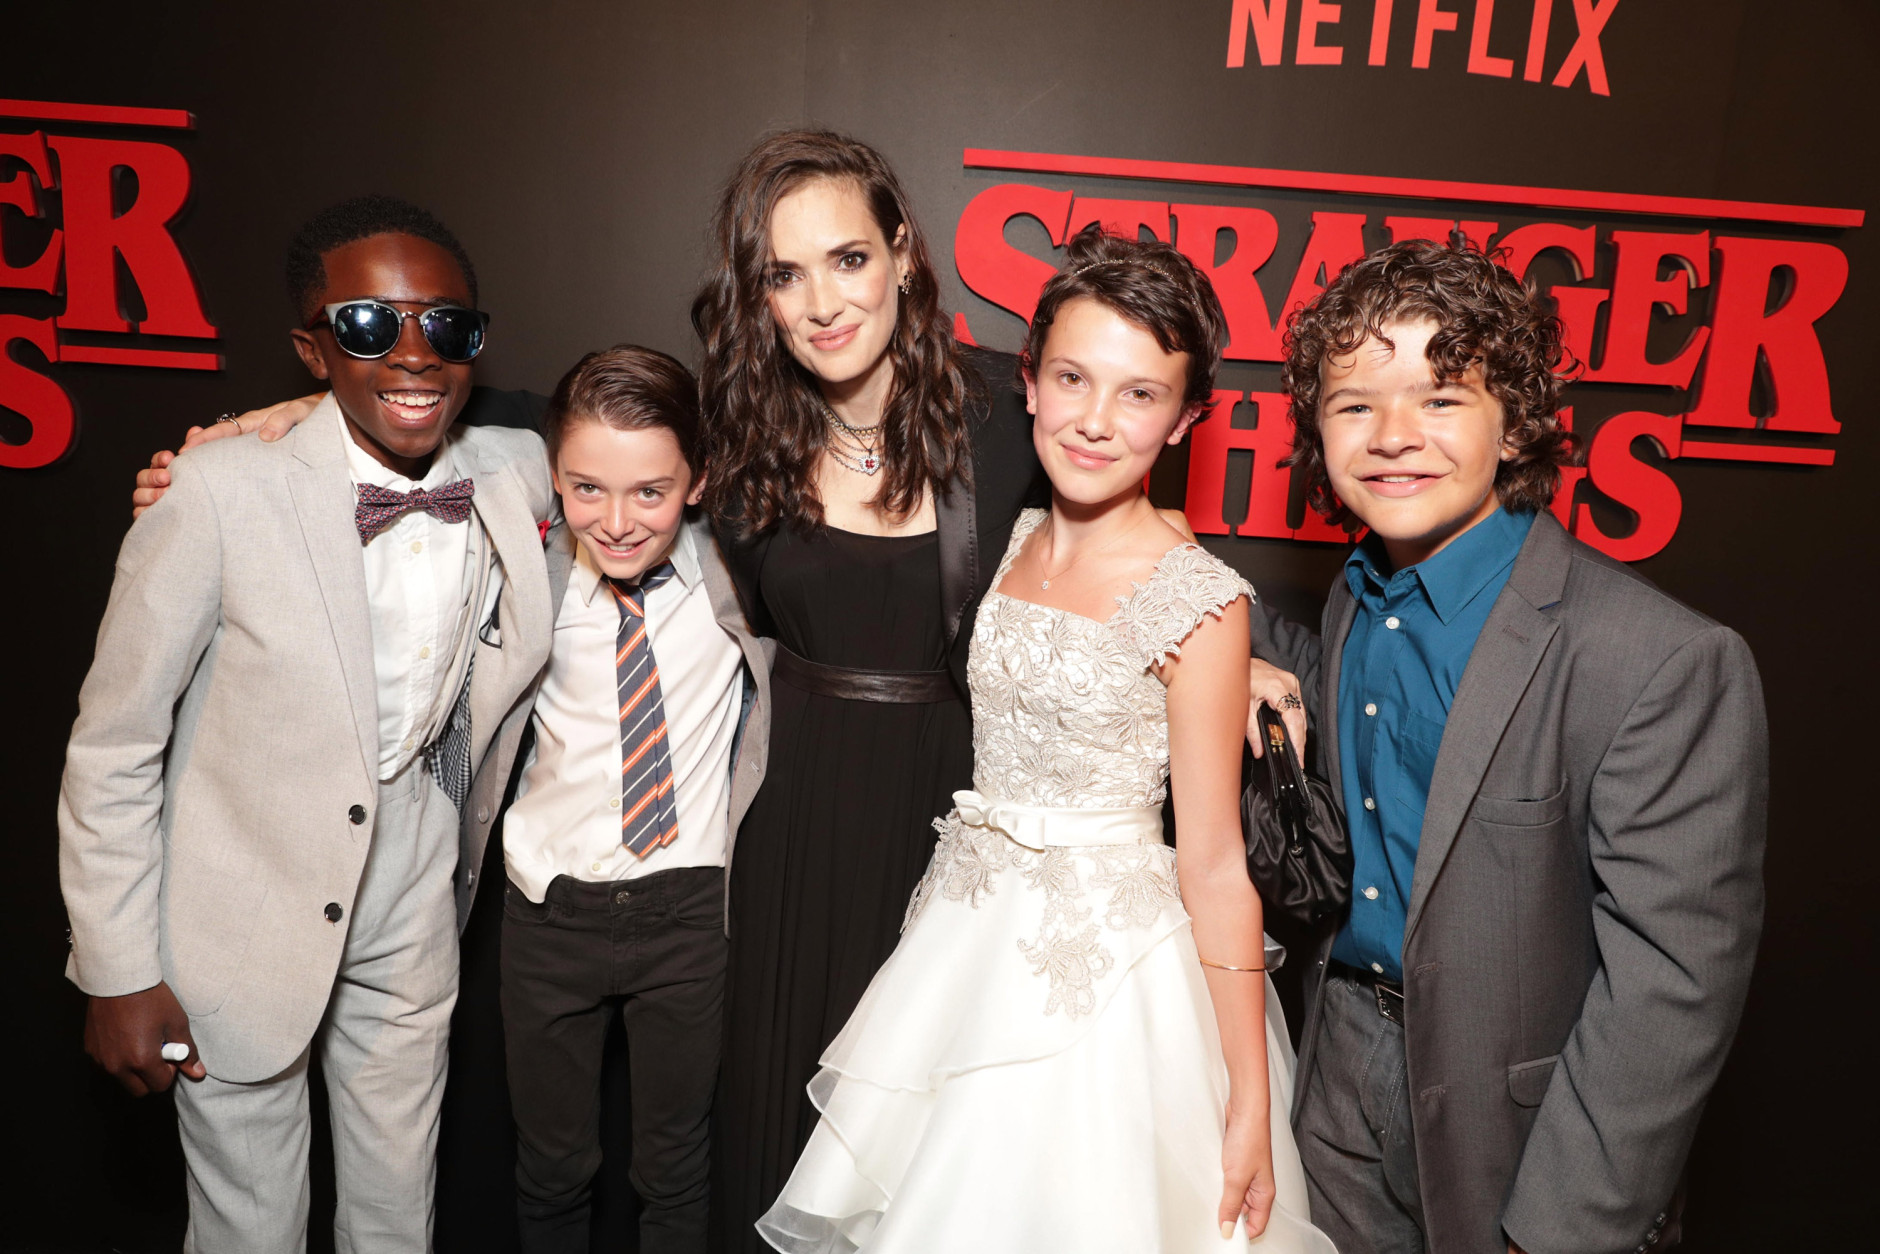 Caleb McLaughlin, Noah Schnapp, Winona Ryder, Millie Brown, Gaten Matarazzo seen at the red carpet premiere in support of the launch of the Netflix original series "Stranger Things" at Mack Sennett Studios on Monday, July 11, 2016, in Los Angeles, CA. (Photo by Eric Charbonneau/Invision for Netflix/AP Images)